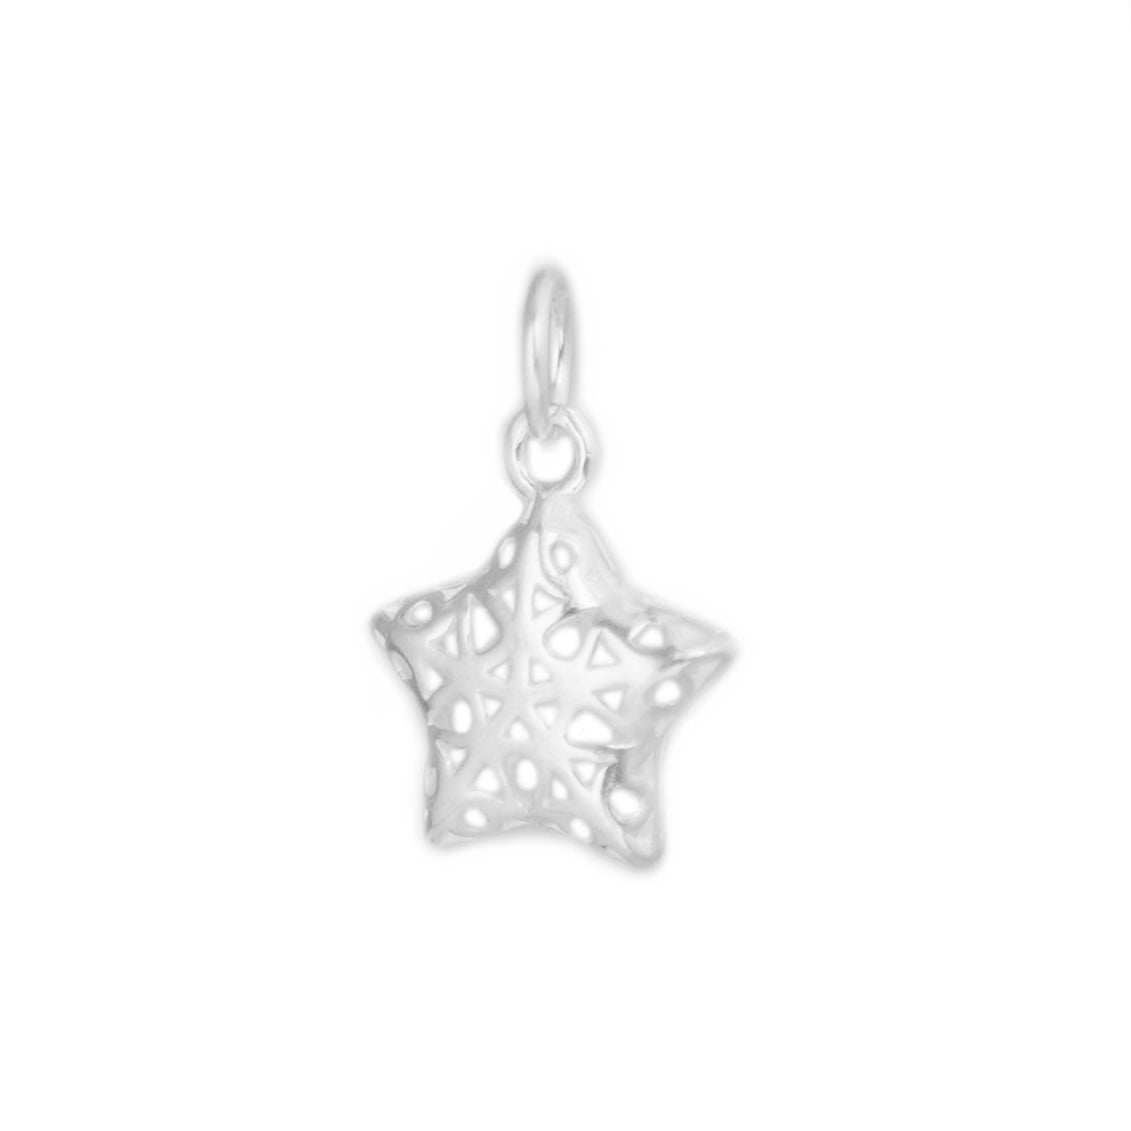 Sterling Silver Hollow Out Filigree Puffy Star Lucky Charm Pendant - sugarkittenlondon